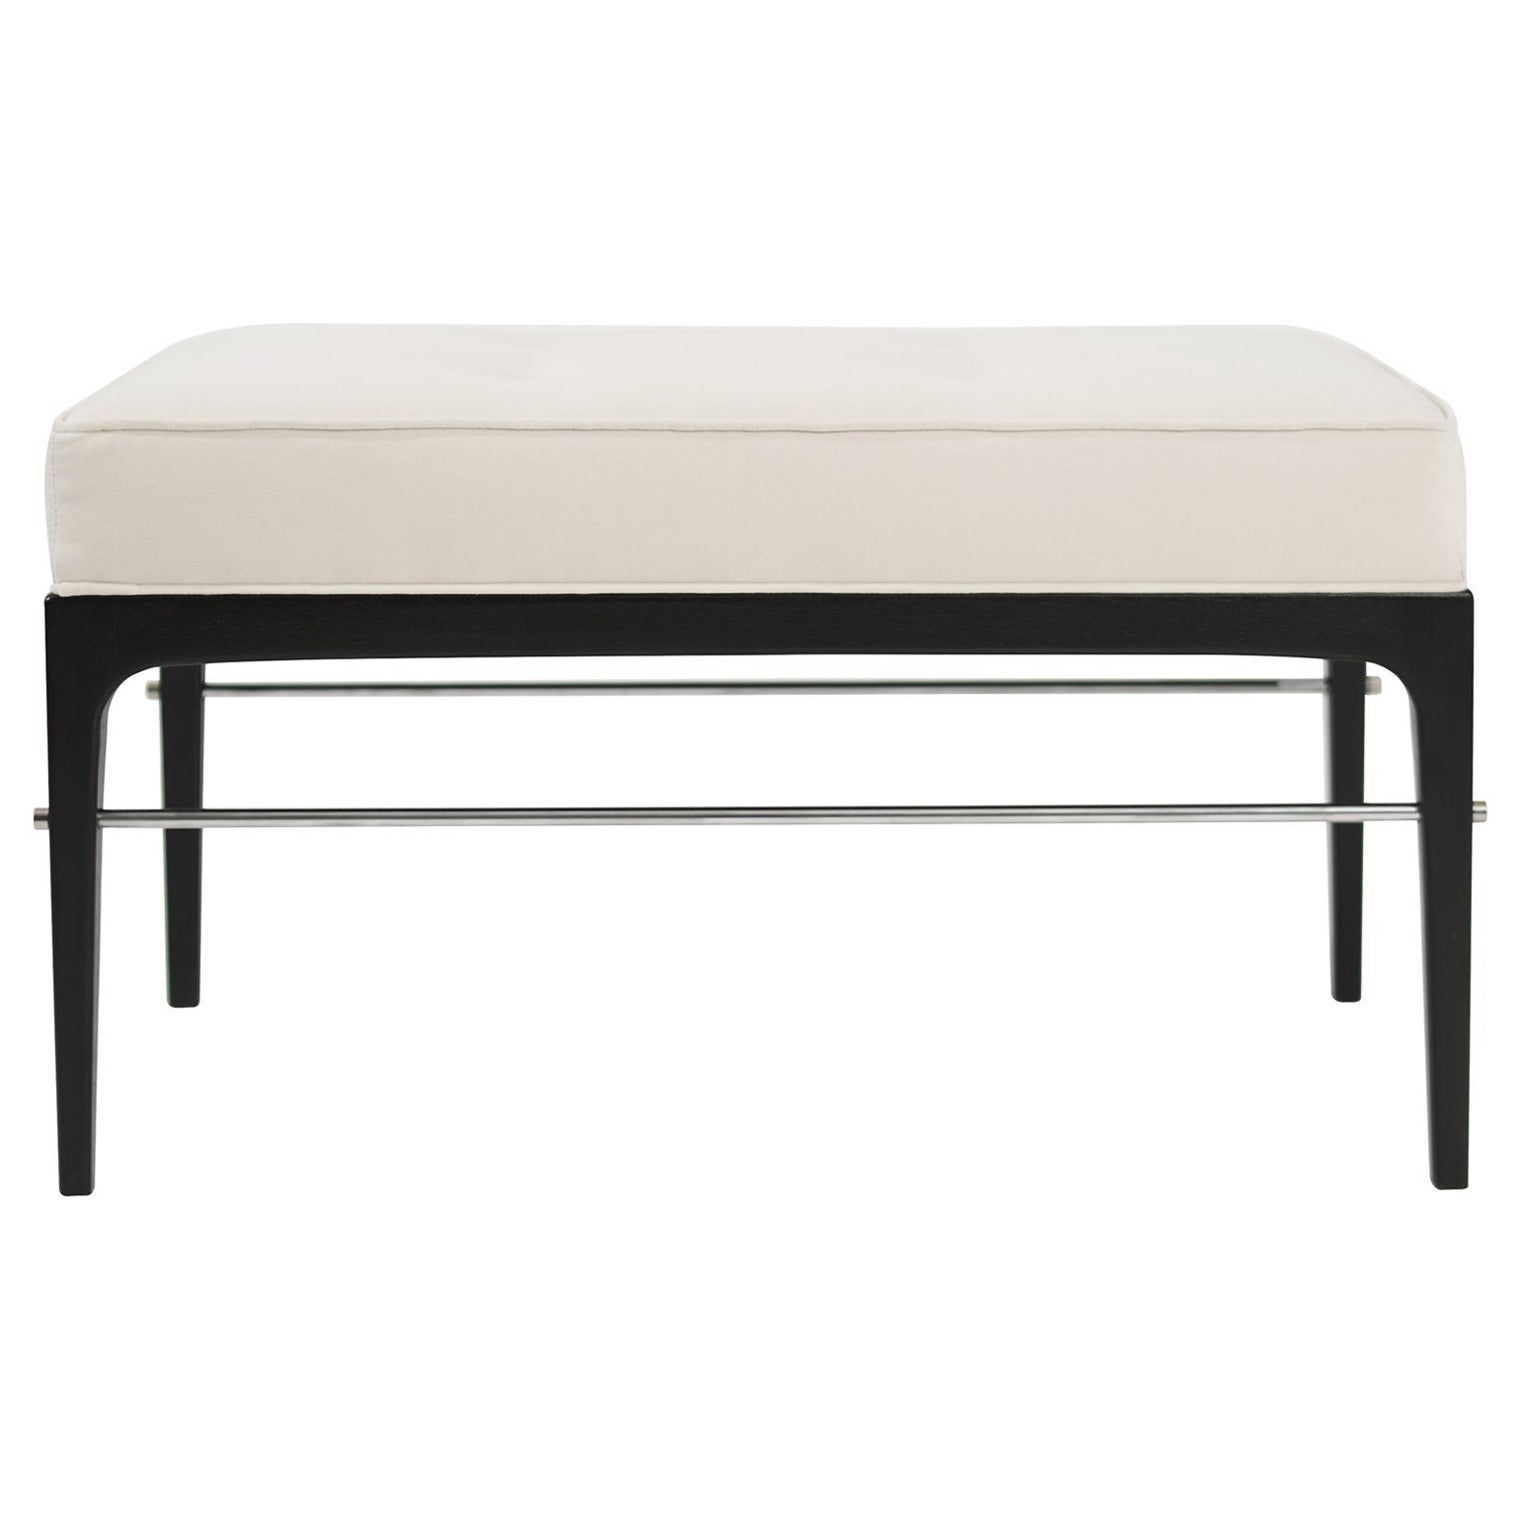 Linear Bench in Espresso Series 36 by Stamford Modern For Sale